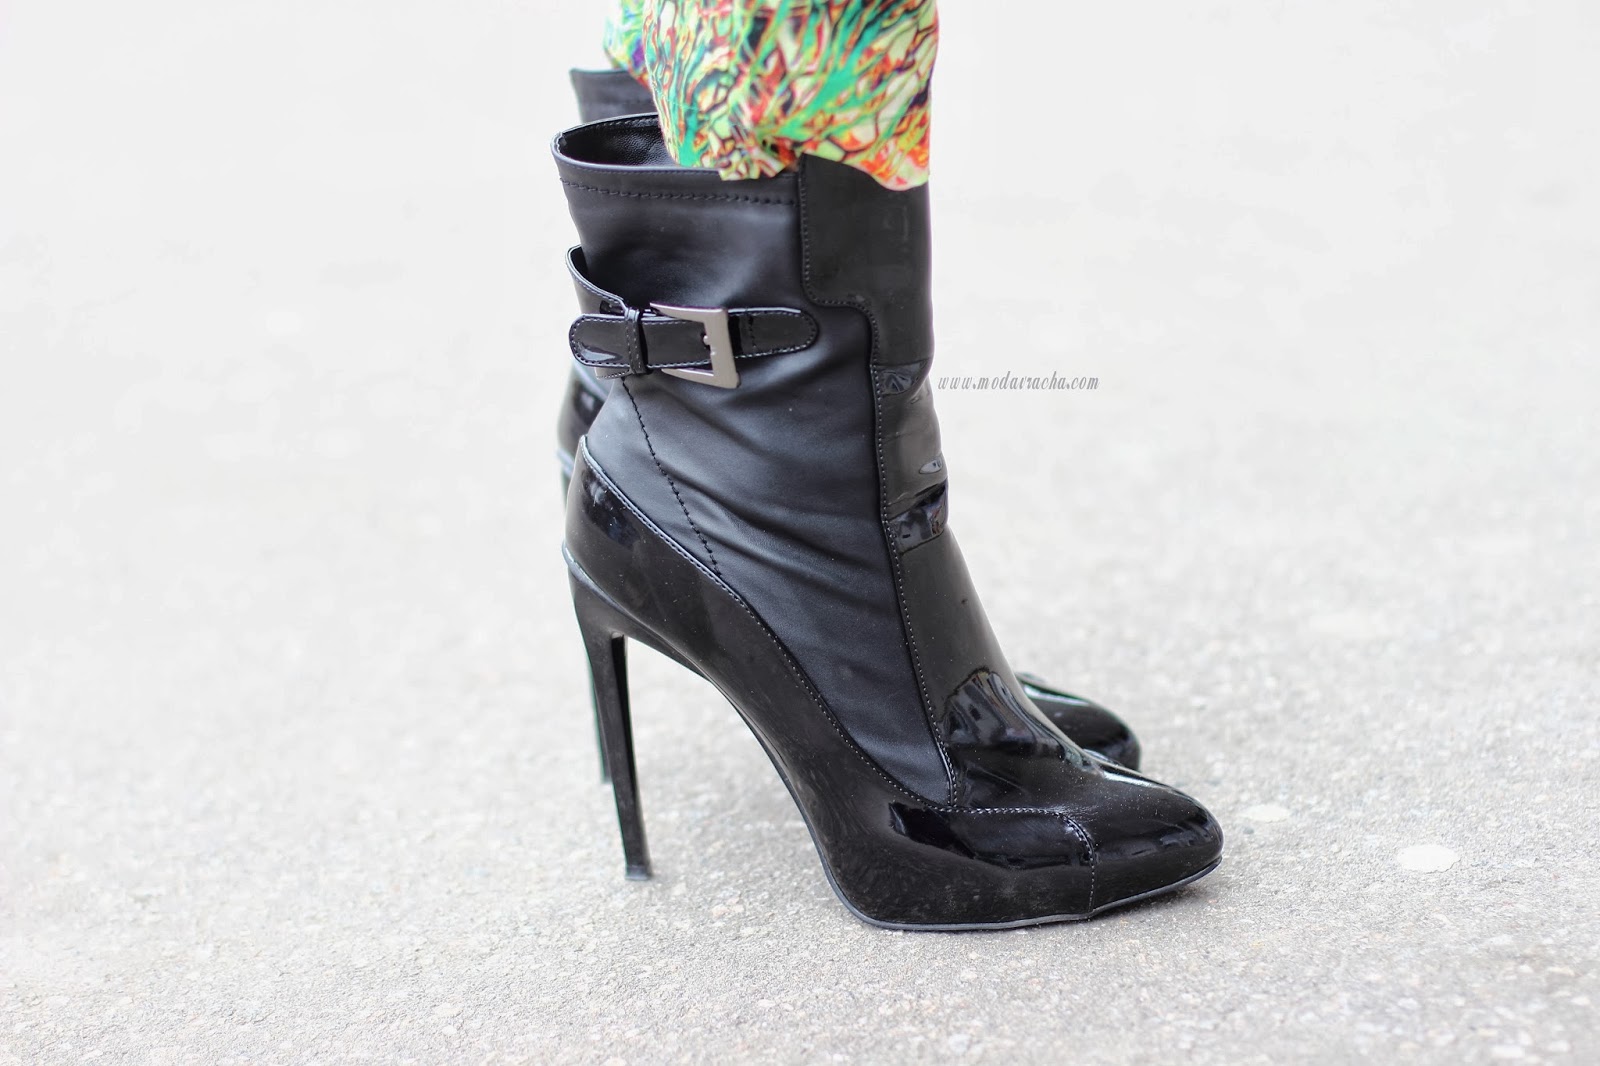 Over the ankle boots